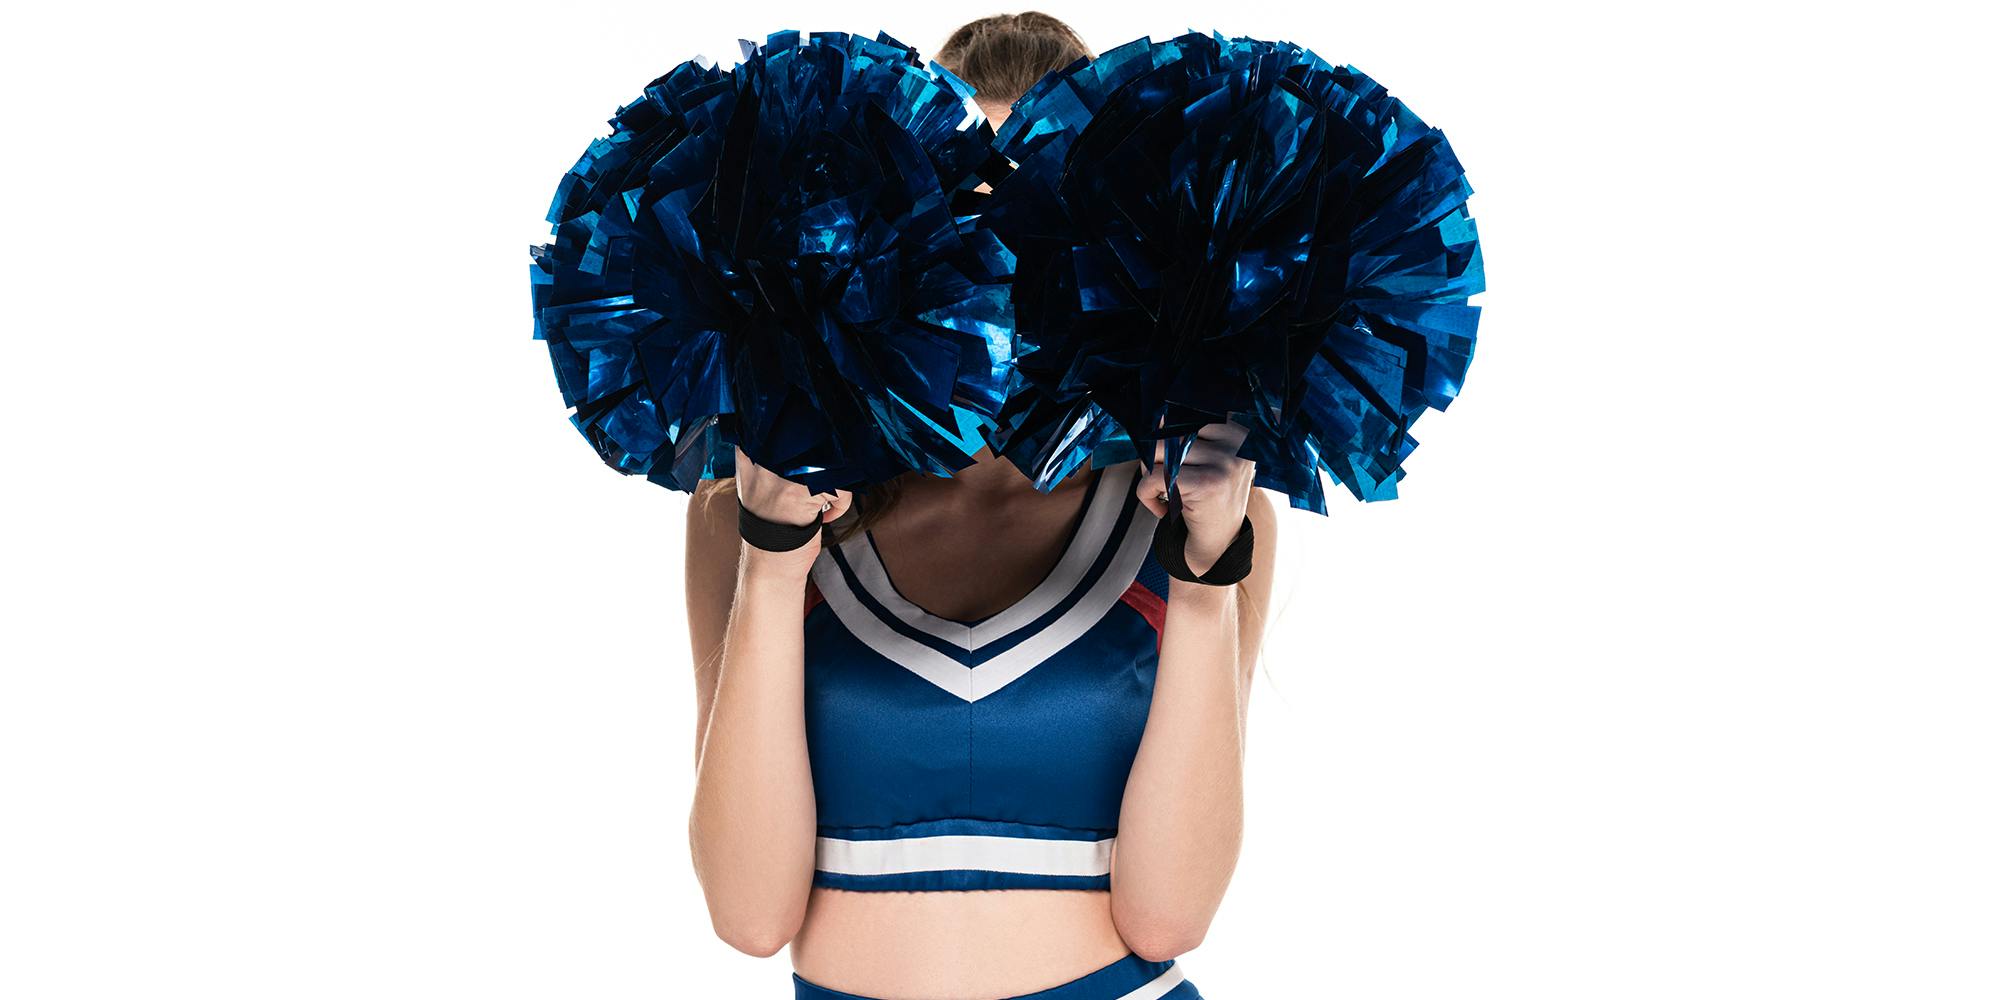 Sexy Cheerleader Porn Videos: 9 Adult Sites That Will Lift Your Spirits